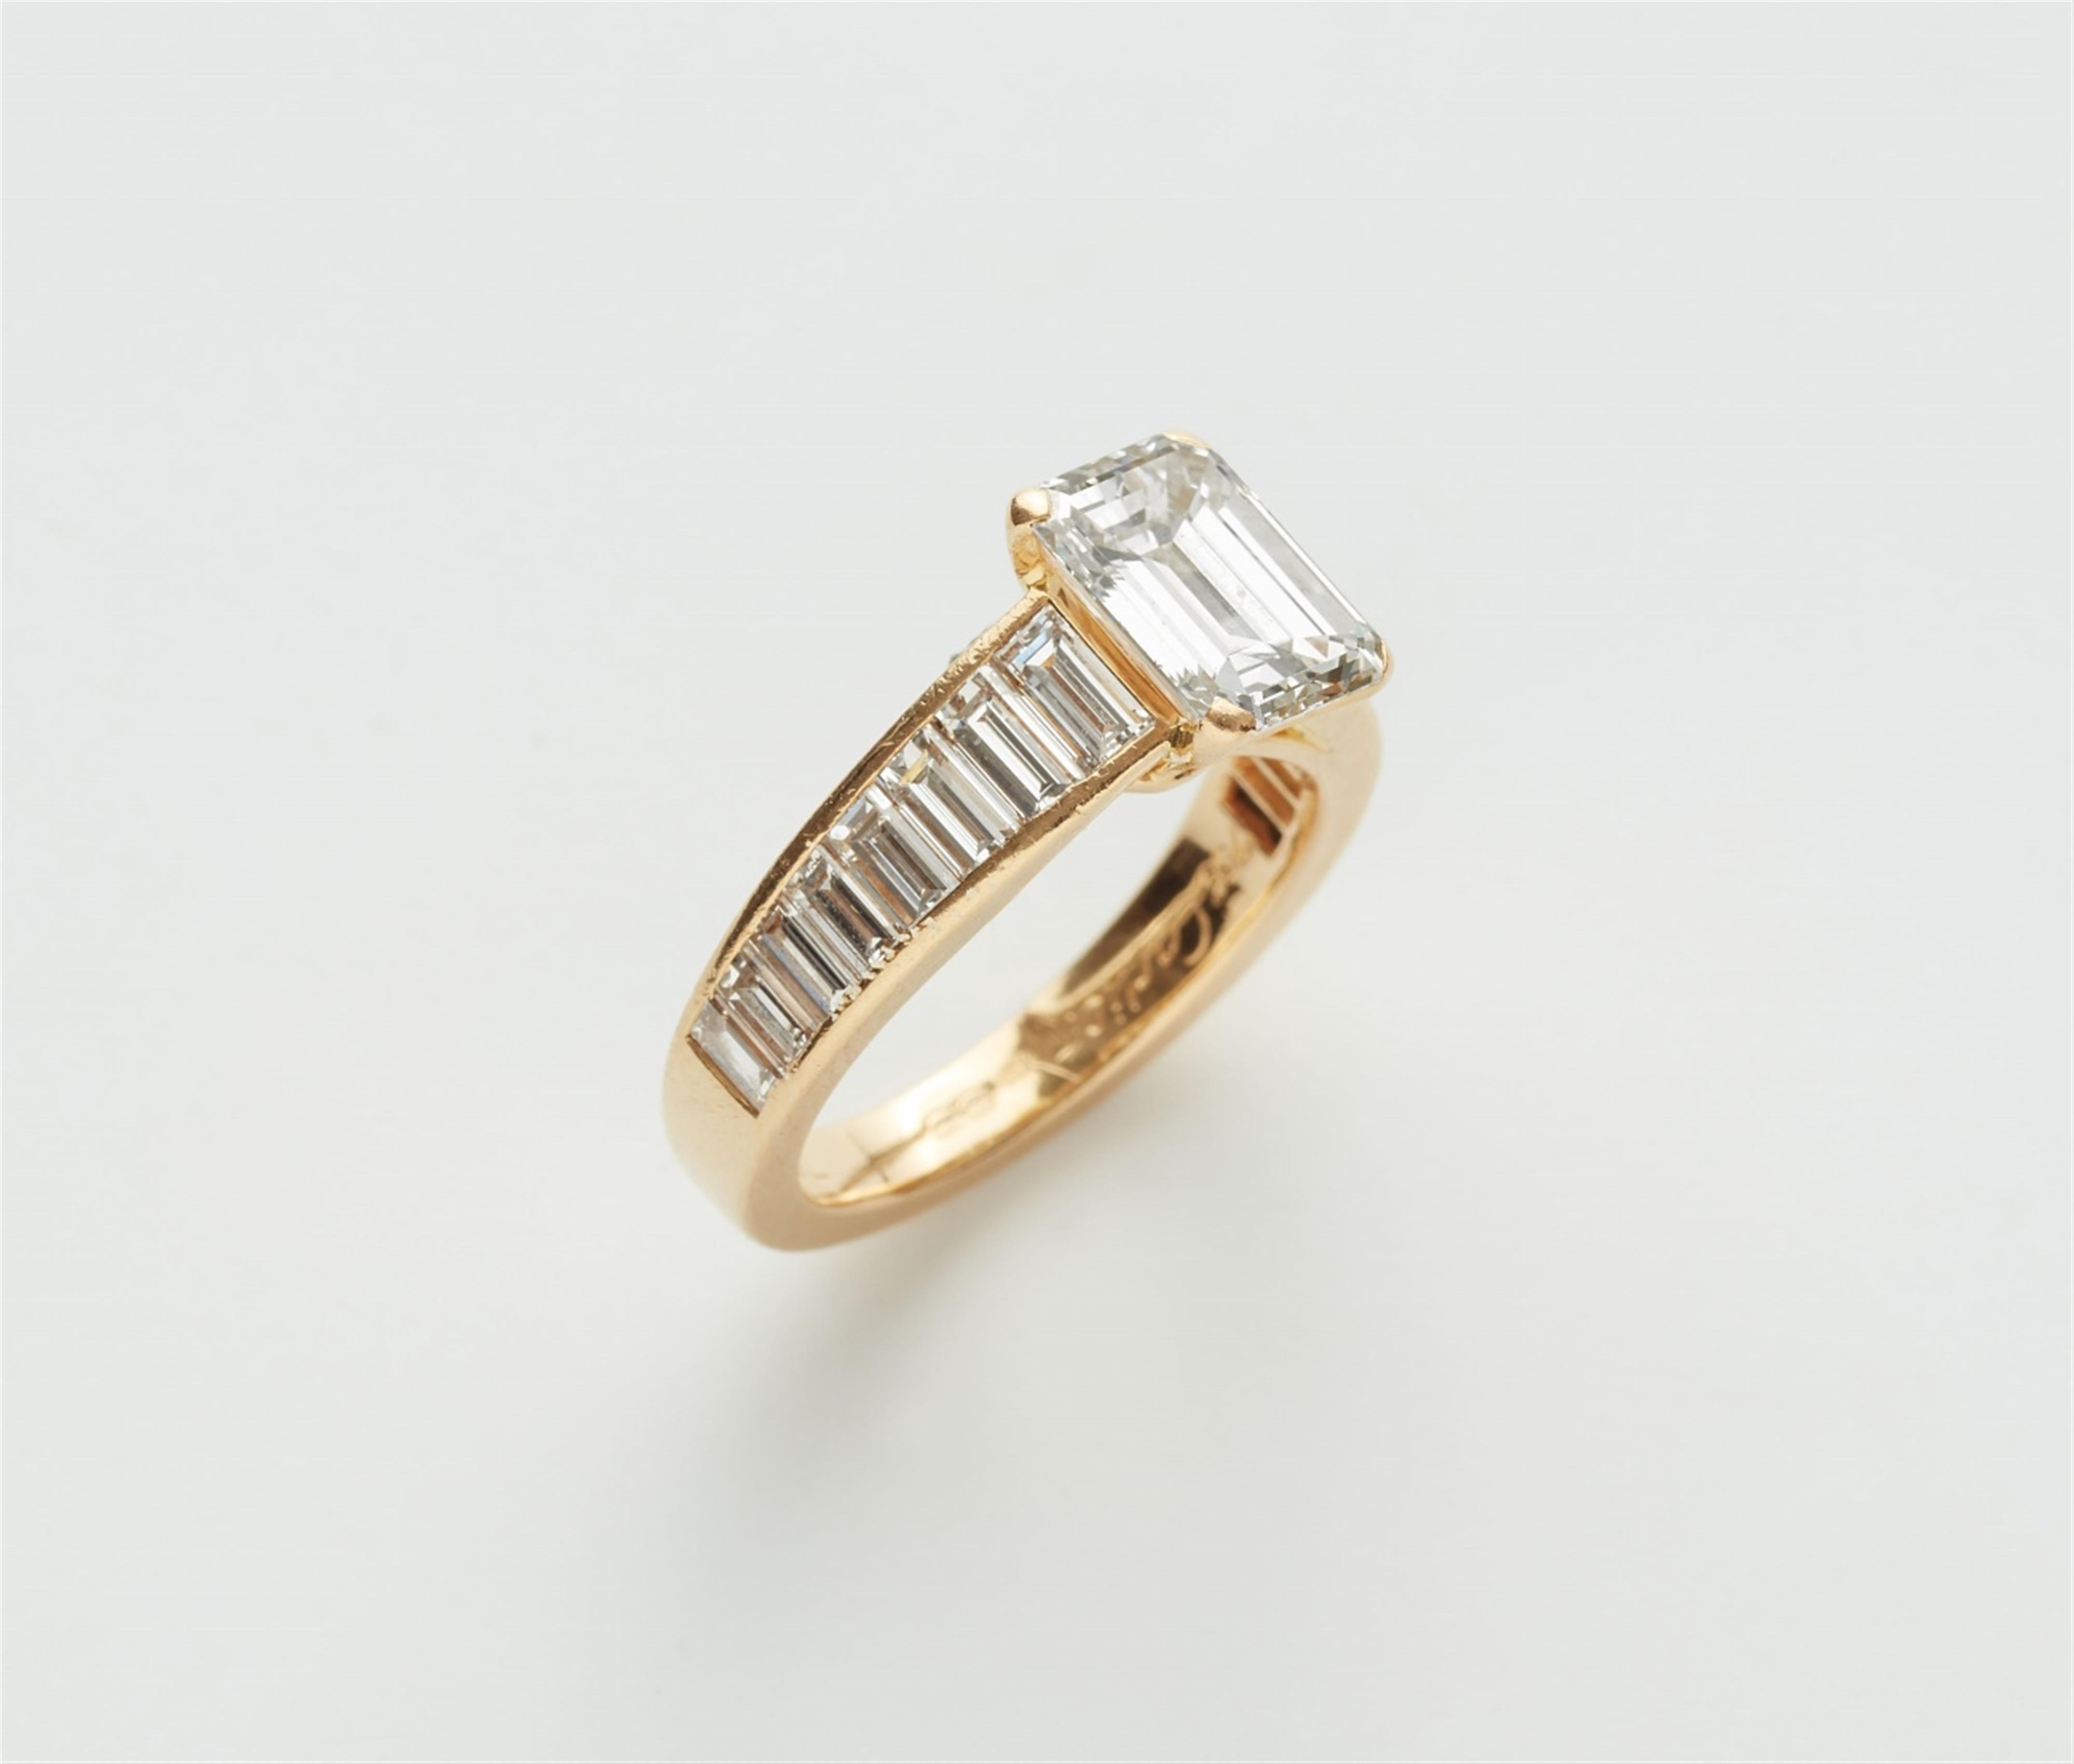 An 18k gold Cartier ring with an emerald-cut diamond solitaire - image-2